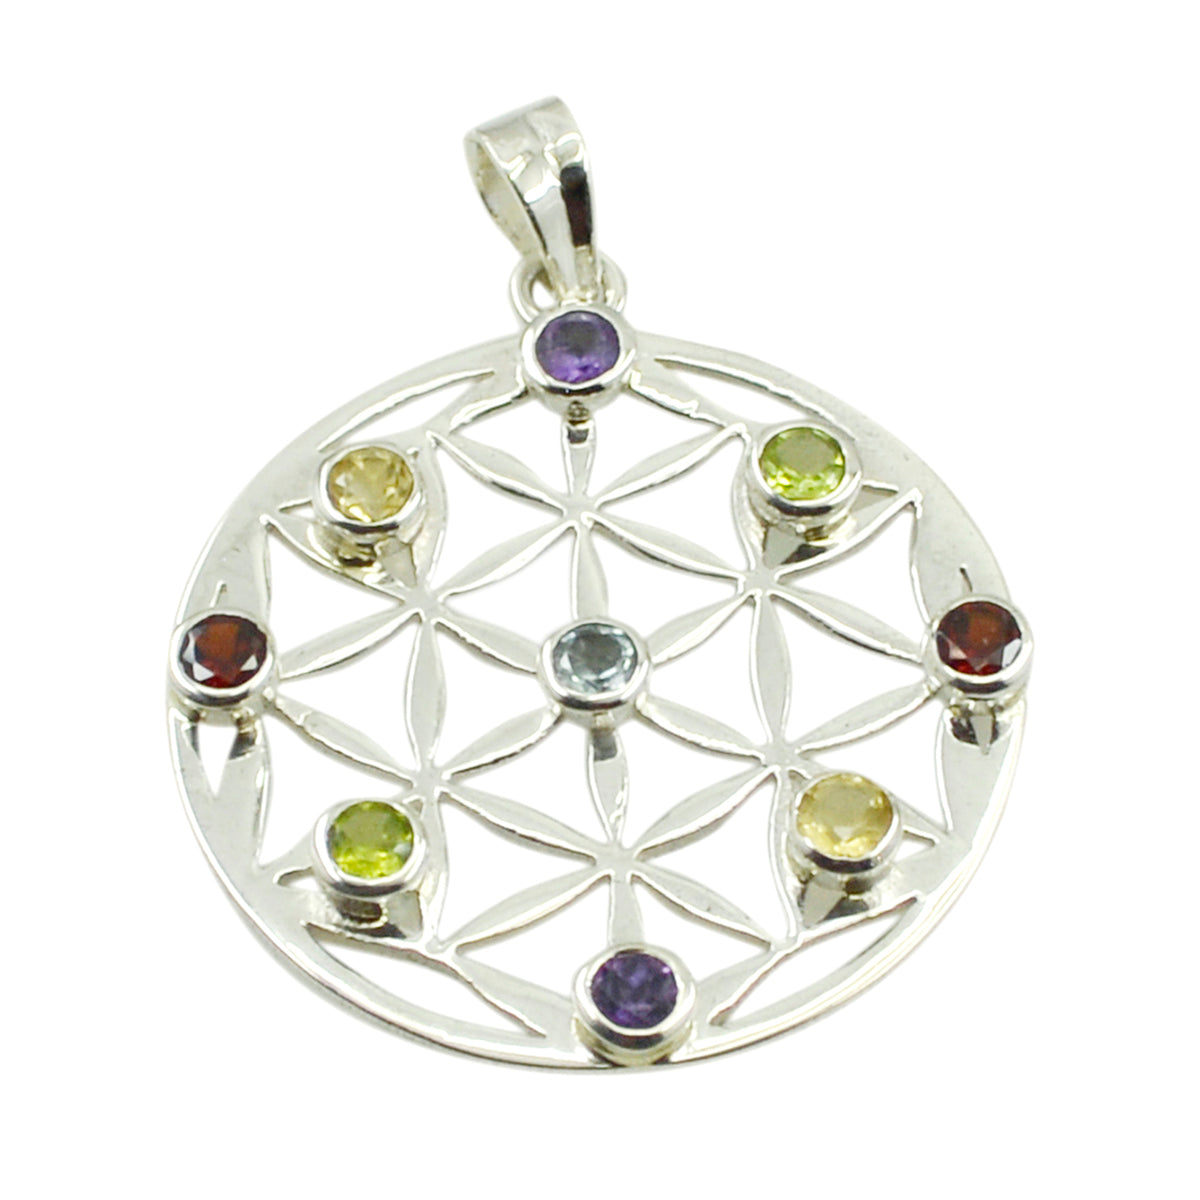 Riyo Beddable Gemstone Round Faceted Multi Color Multi Stone 1016 Sterling Silver Pendant Gift For Girlfriend